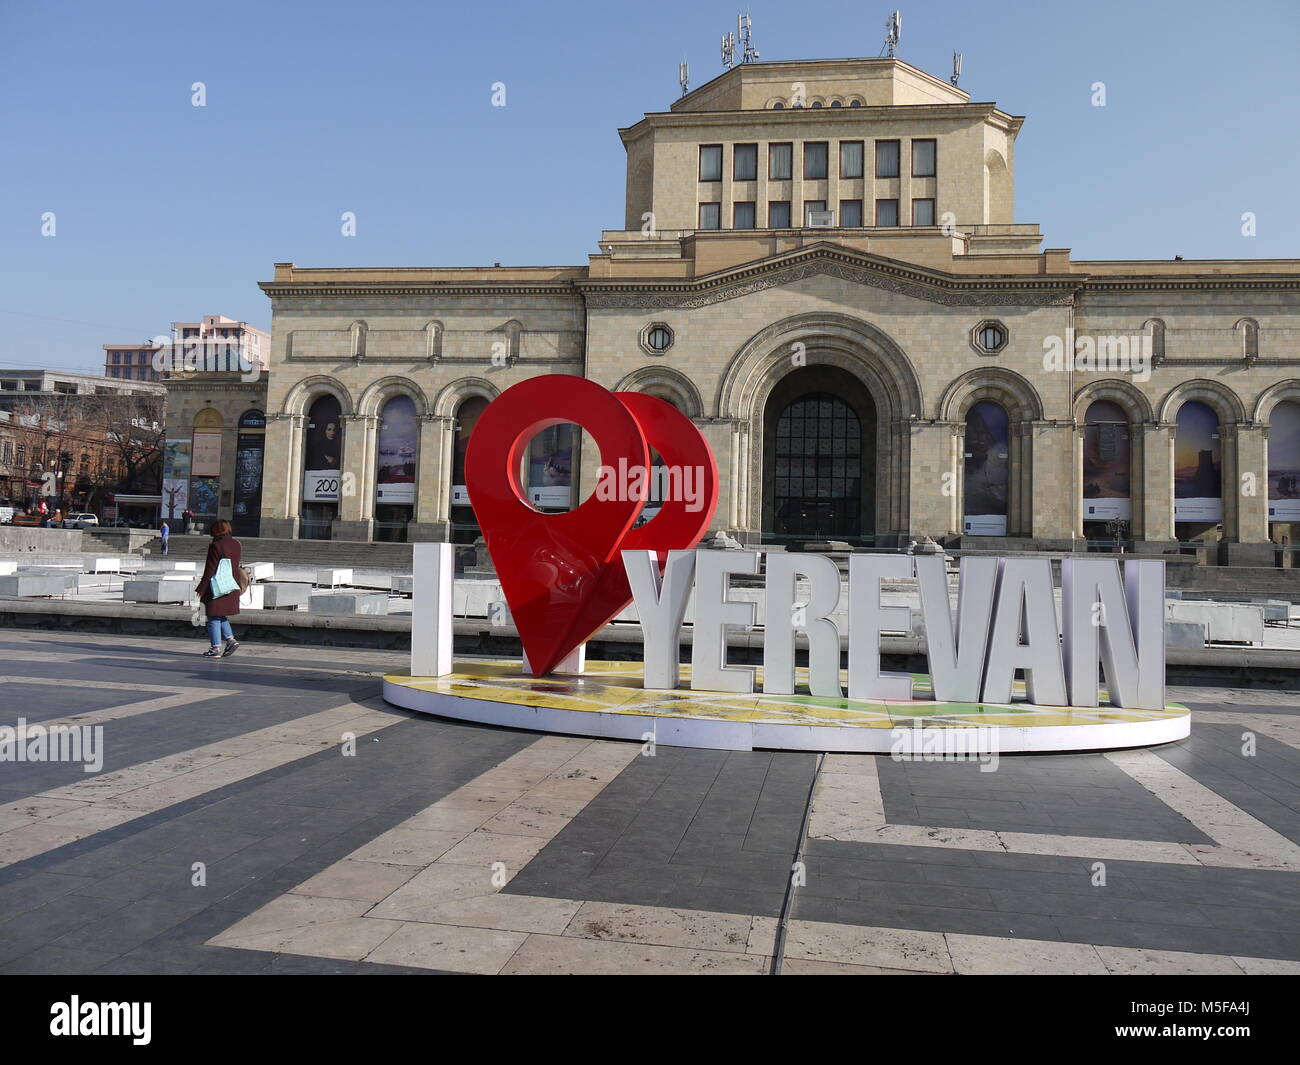 Histotical museum on Republic square in city center is one of main attraction for tourists in Yerevan, Armenia Stock Photo